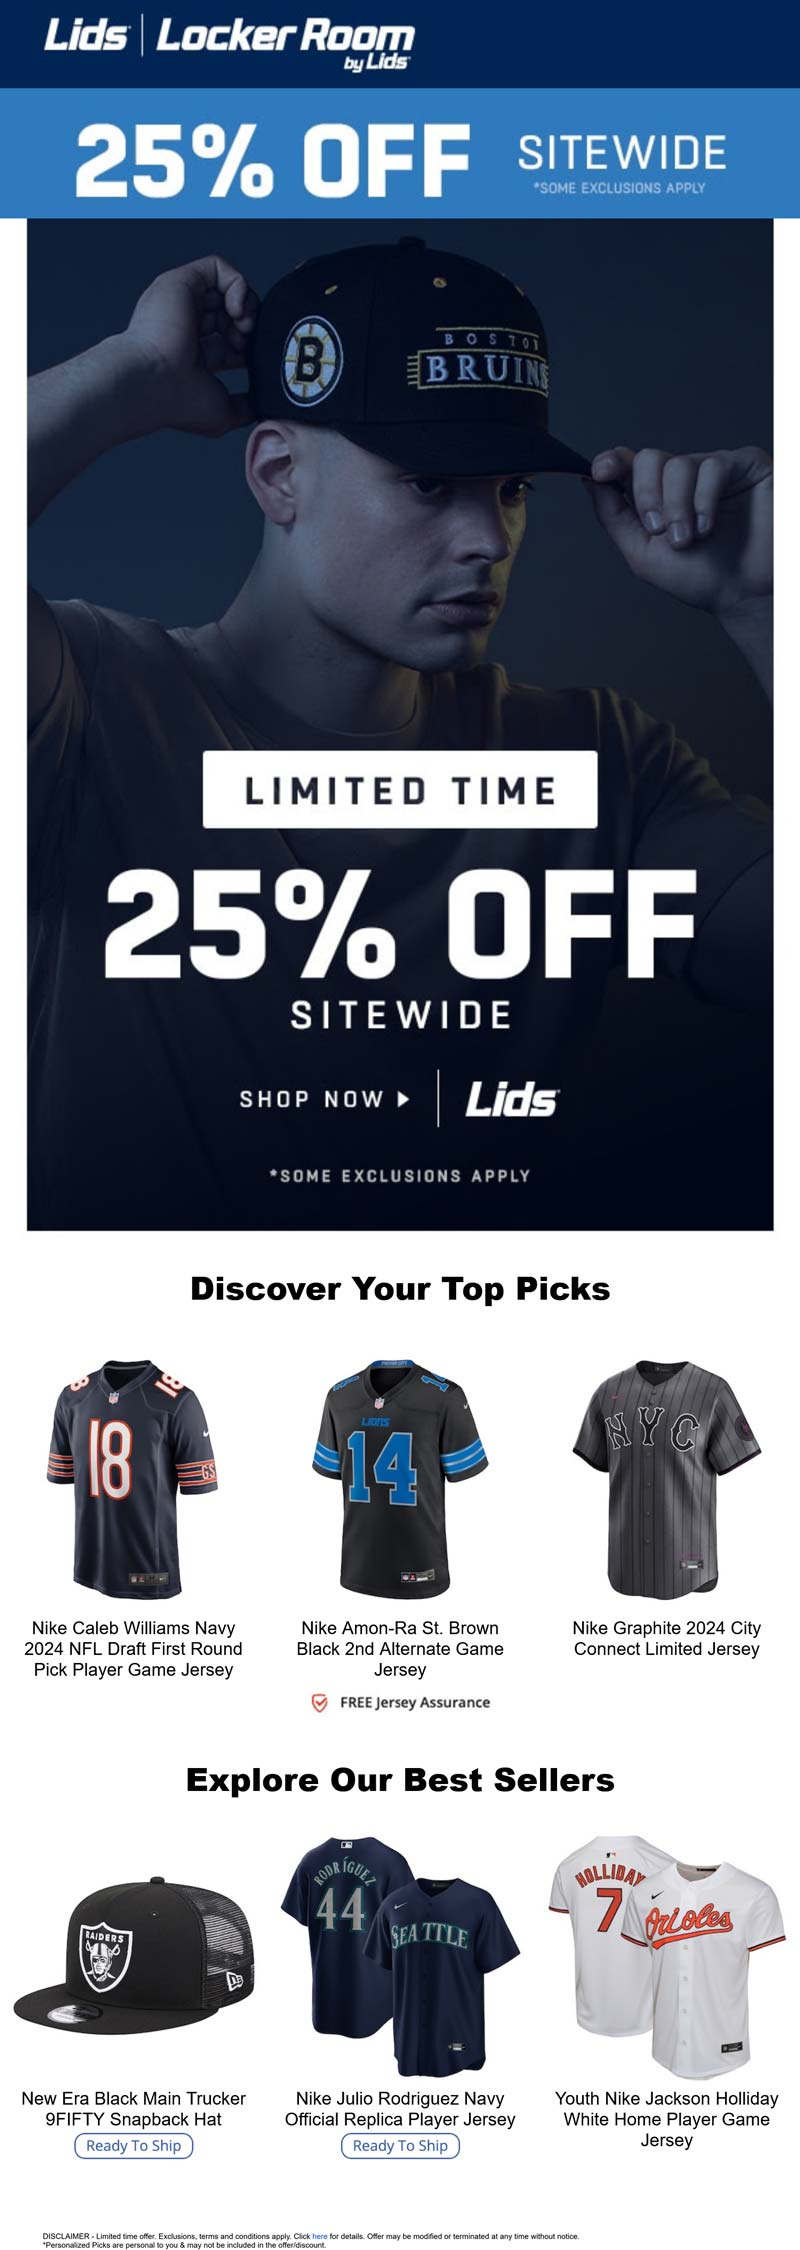 Lids stores Coupon  25% off everything online today at Lids via promo code LIDS25 #lids 